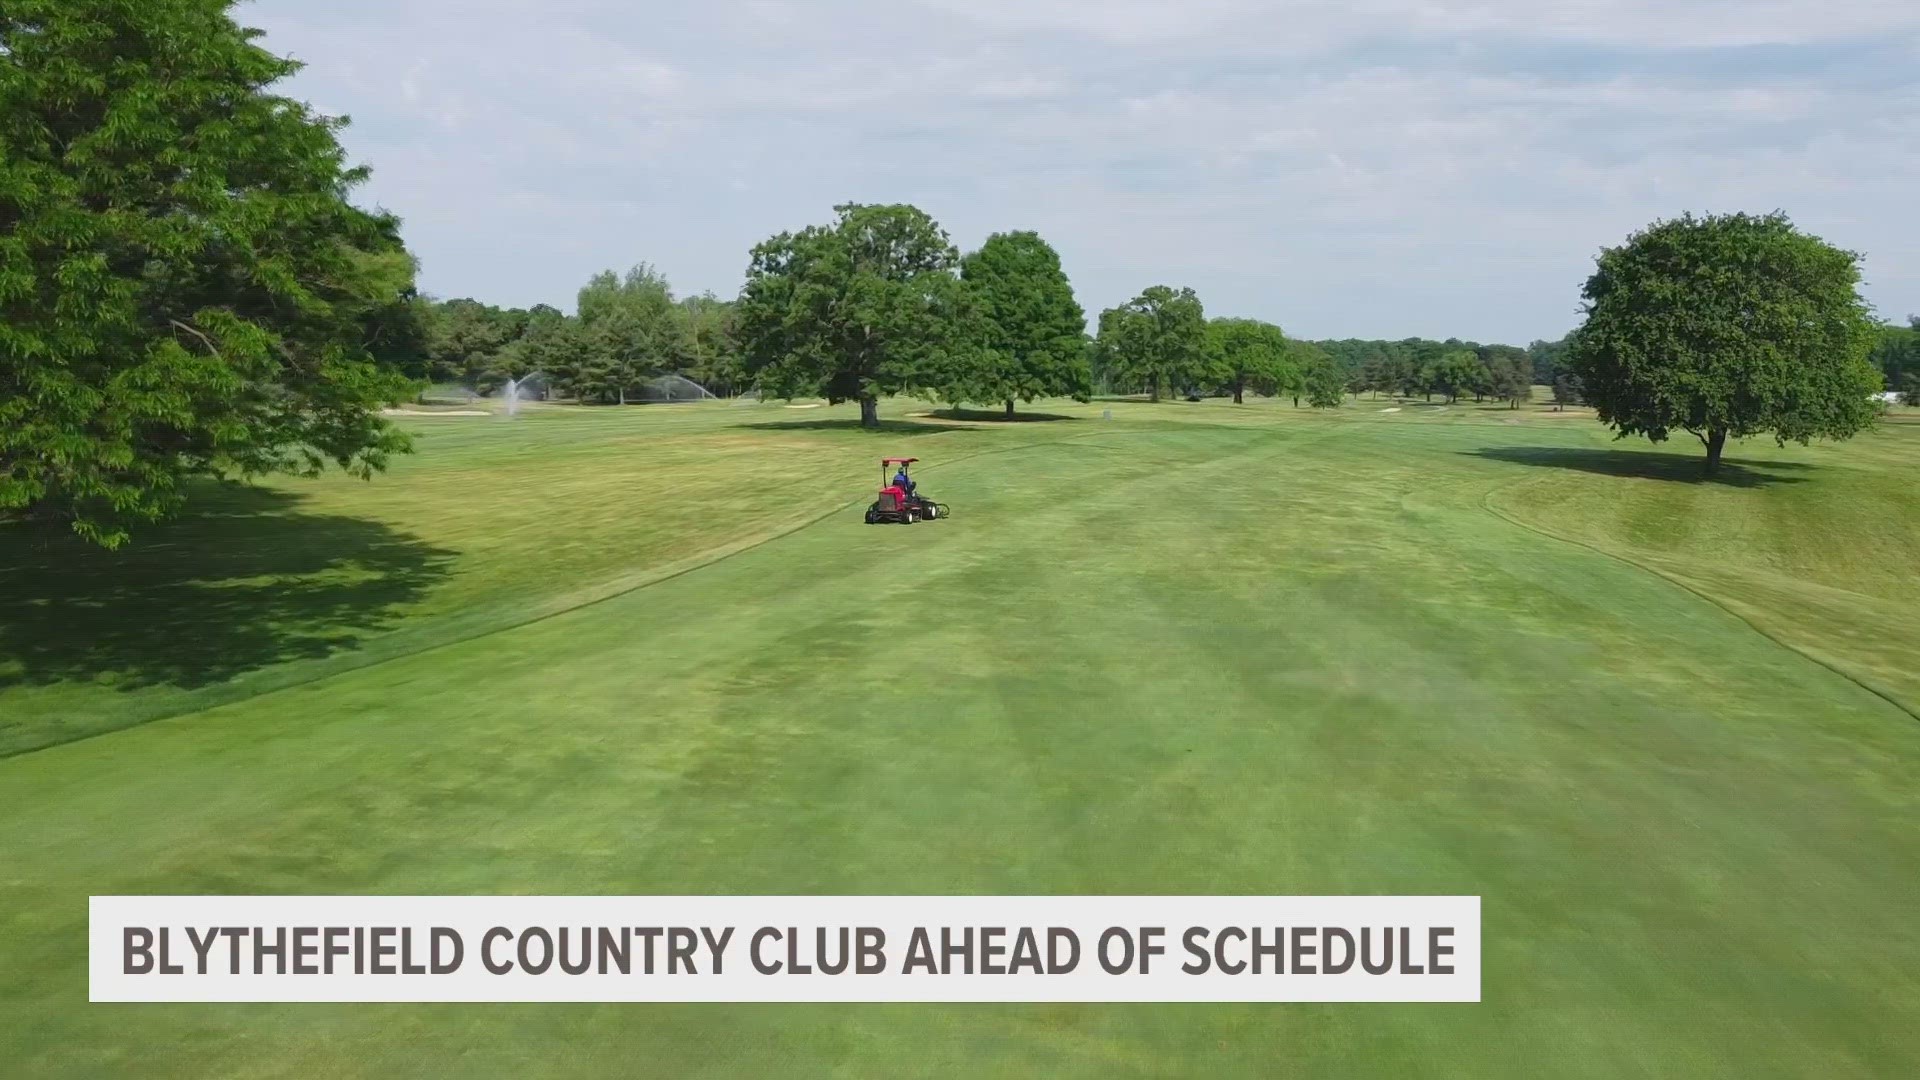 With the LPGA set to arrive next week for their annual visit, Blythefield Country Club is still finishing up some much needed construction projects.